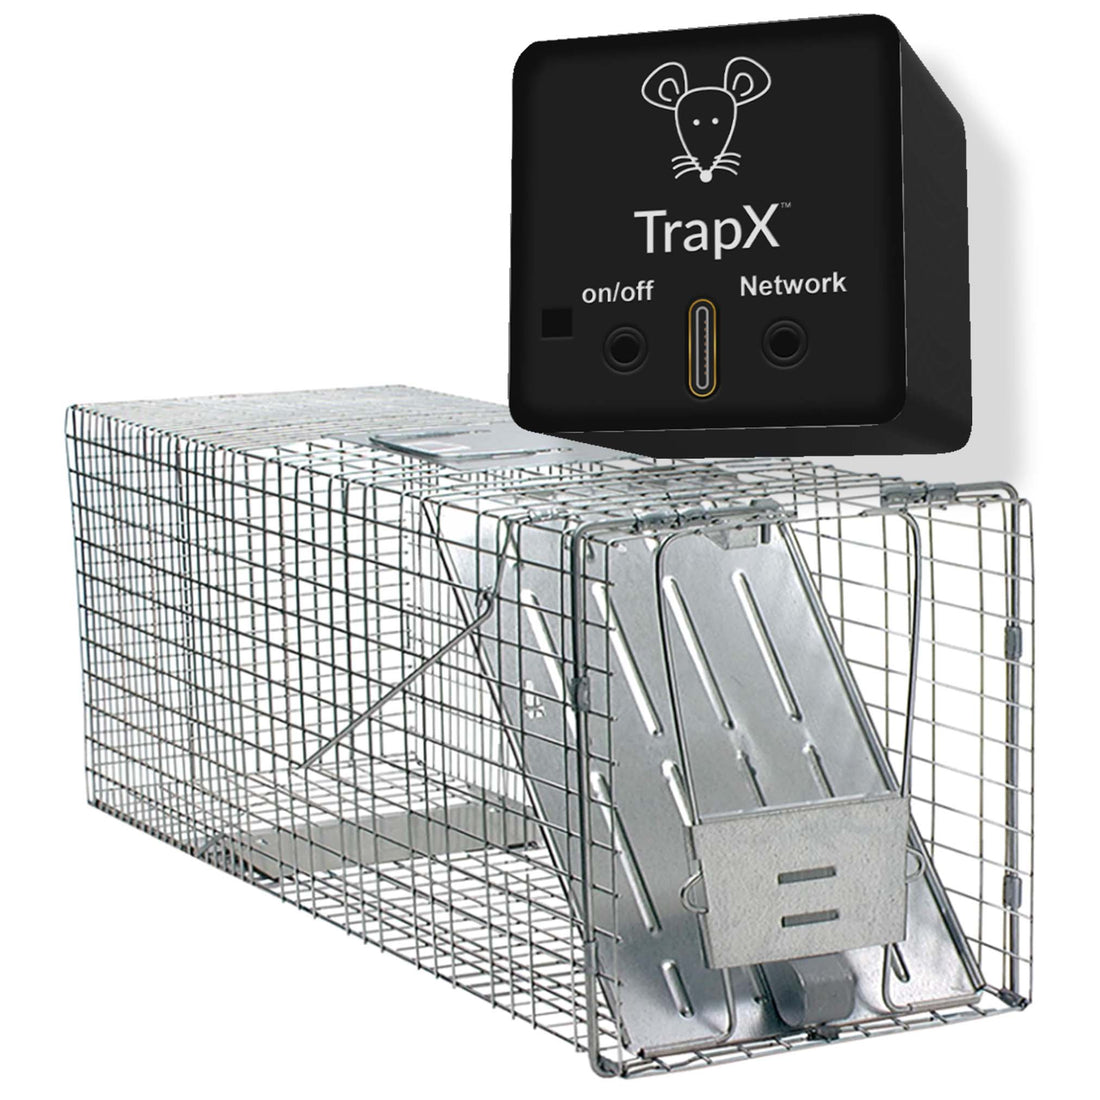 Can humane mouse traps be used outdoors?